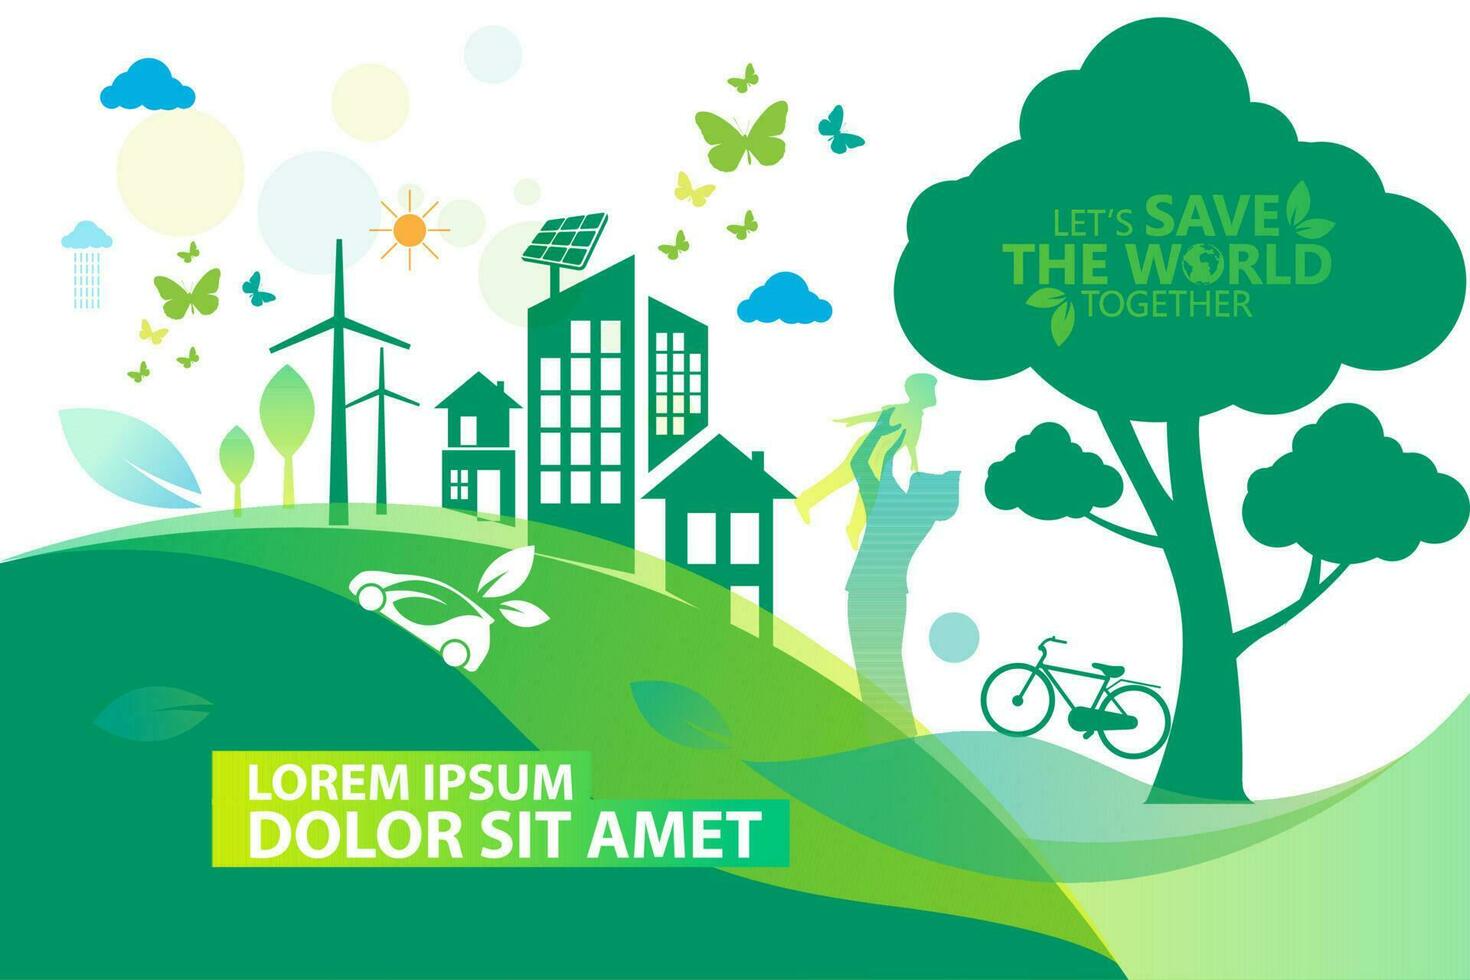 Ecology.Green cities help the world with eco-friendly concept ideas.vector illustration vector